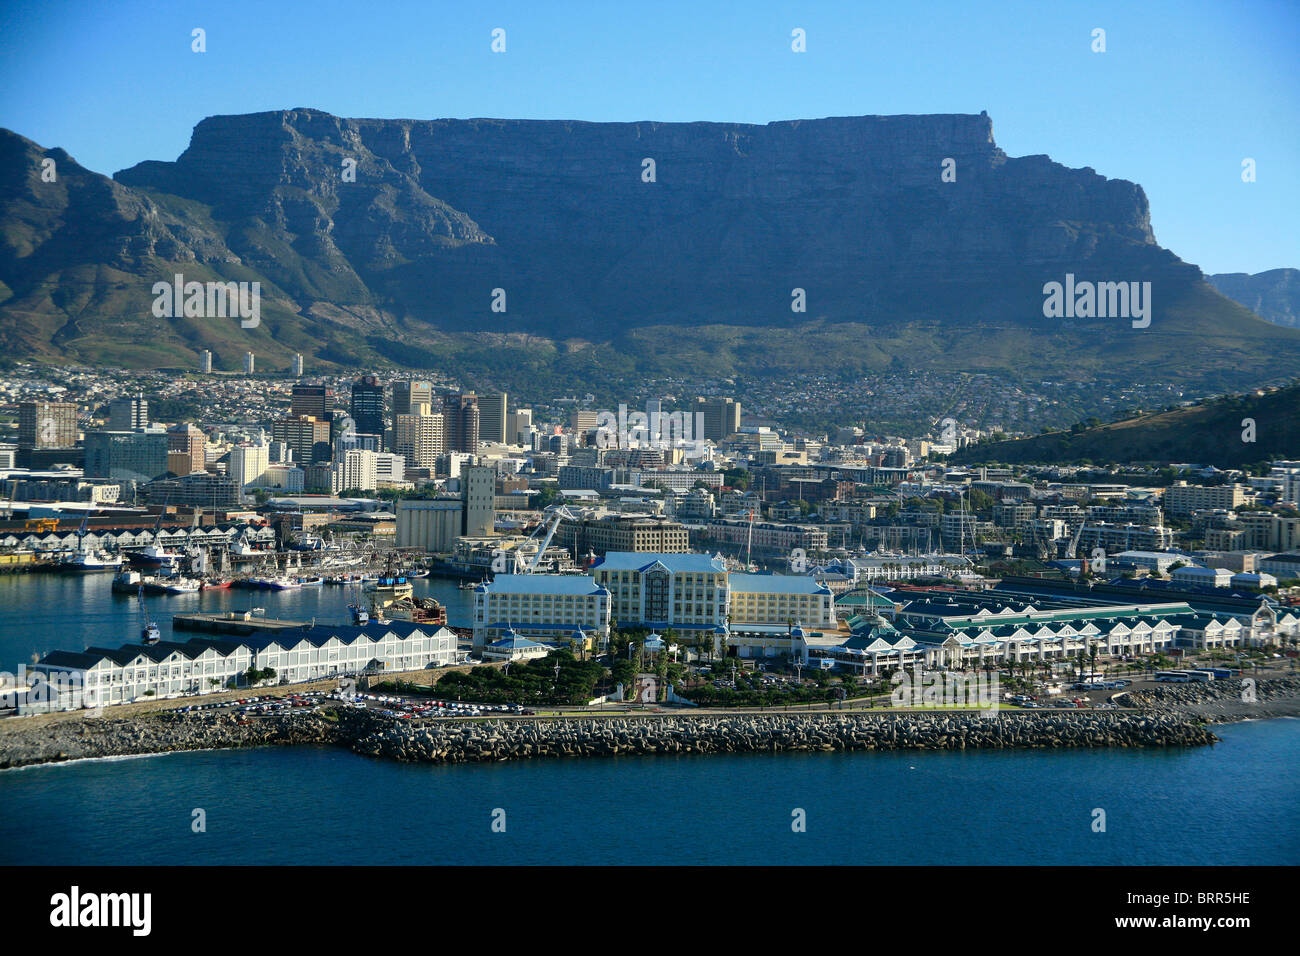 V & A Waterfront, Table Bay Hotel and Cape Town CBD with Table Mountain in the background Stock Photo